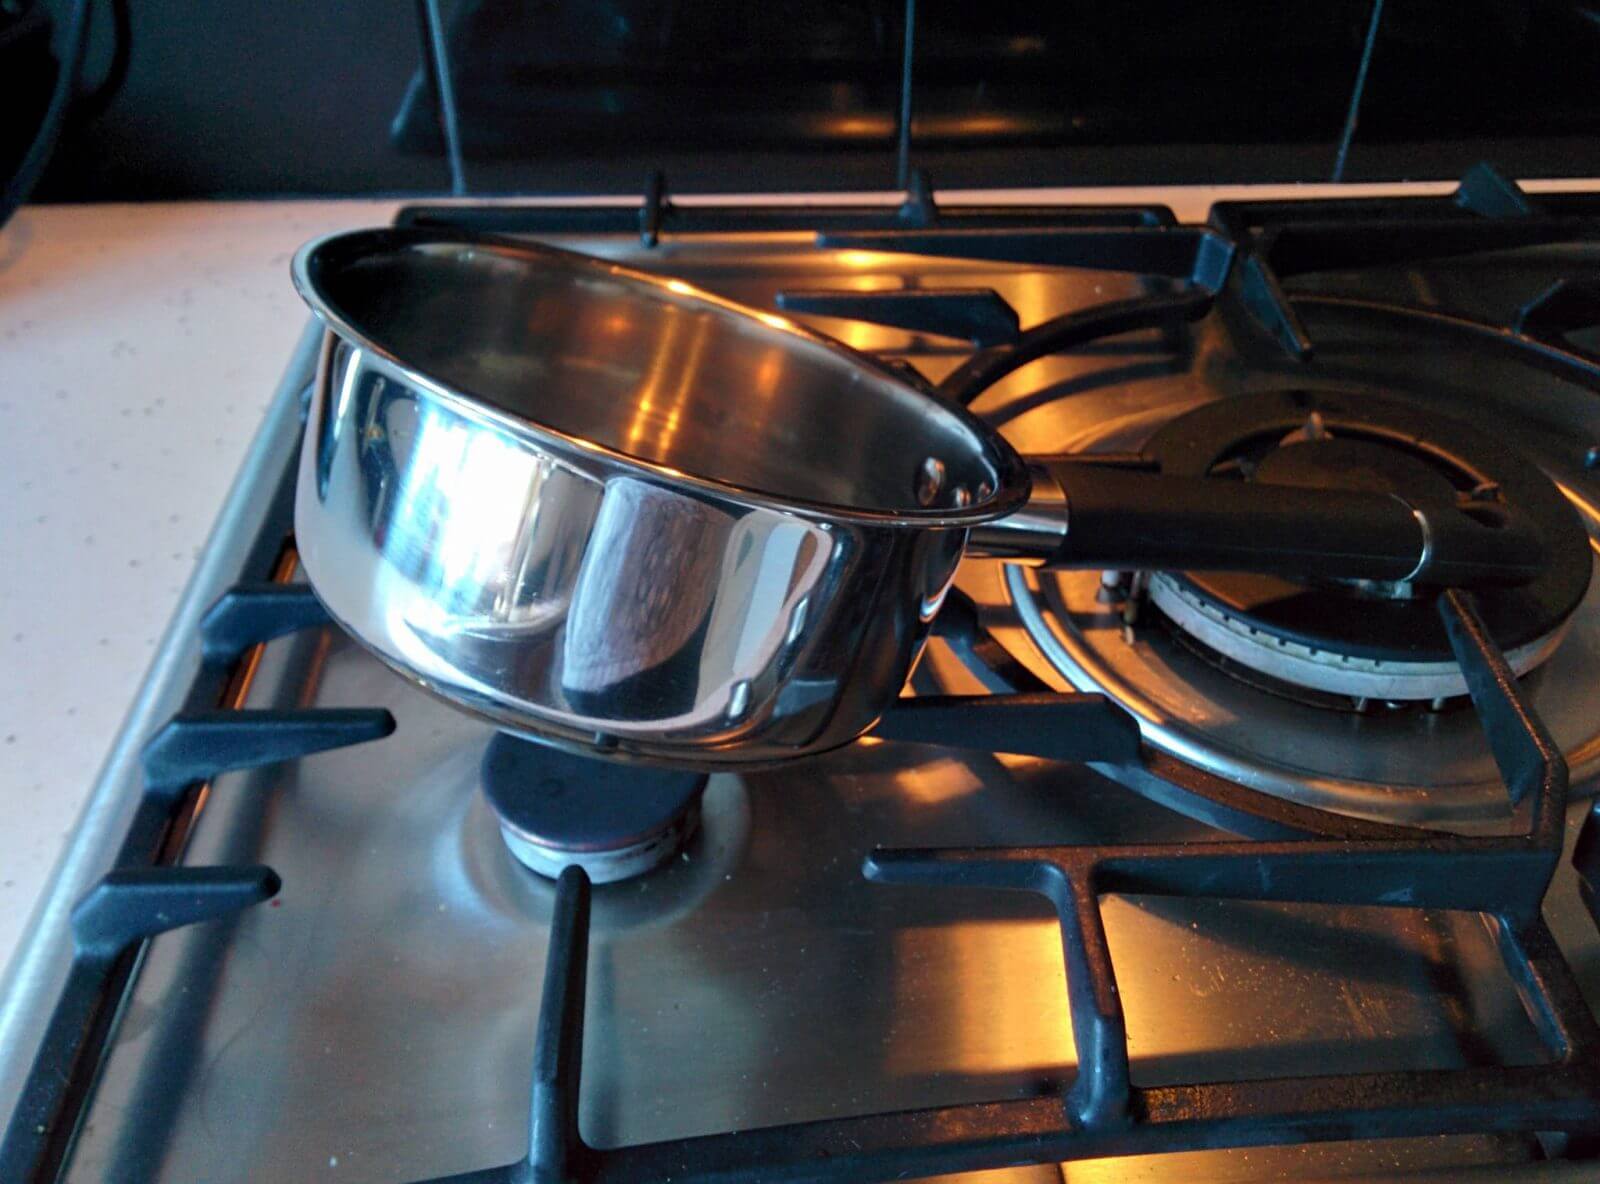 15 Hilarious Pictures Reveal How Life Can Get Unfair Sometimes - So you are in the mood to cook something. But no you can't, because the pan is not in the mood, it just wants to relax.